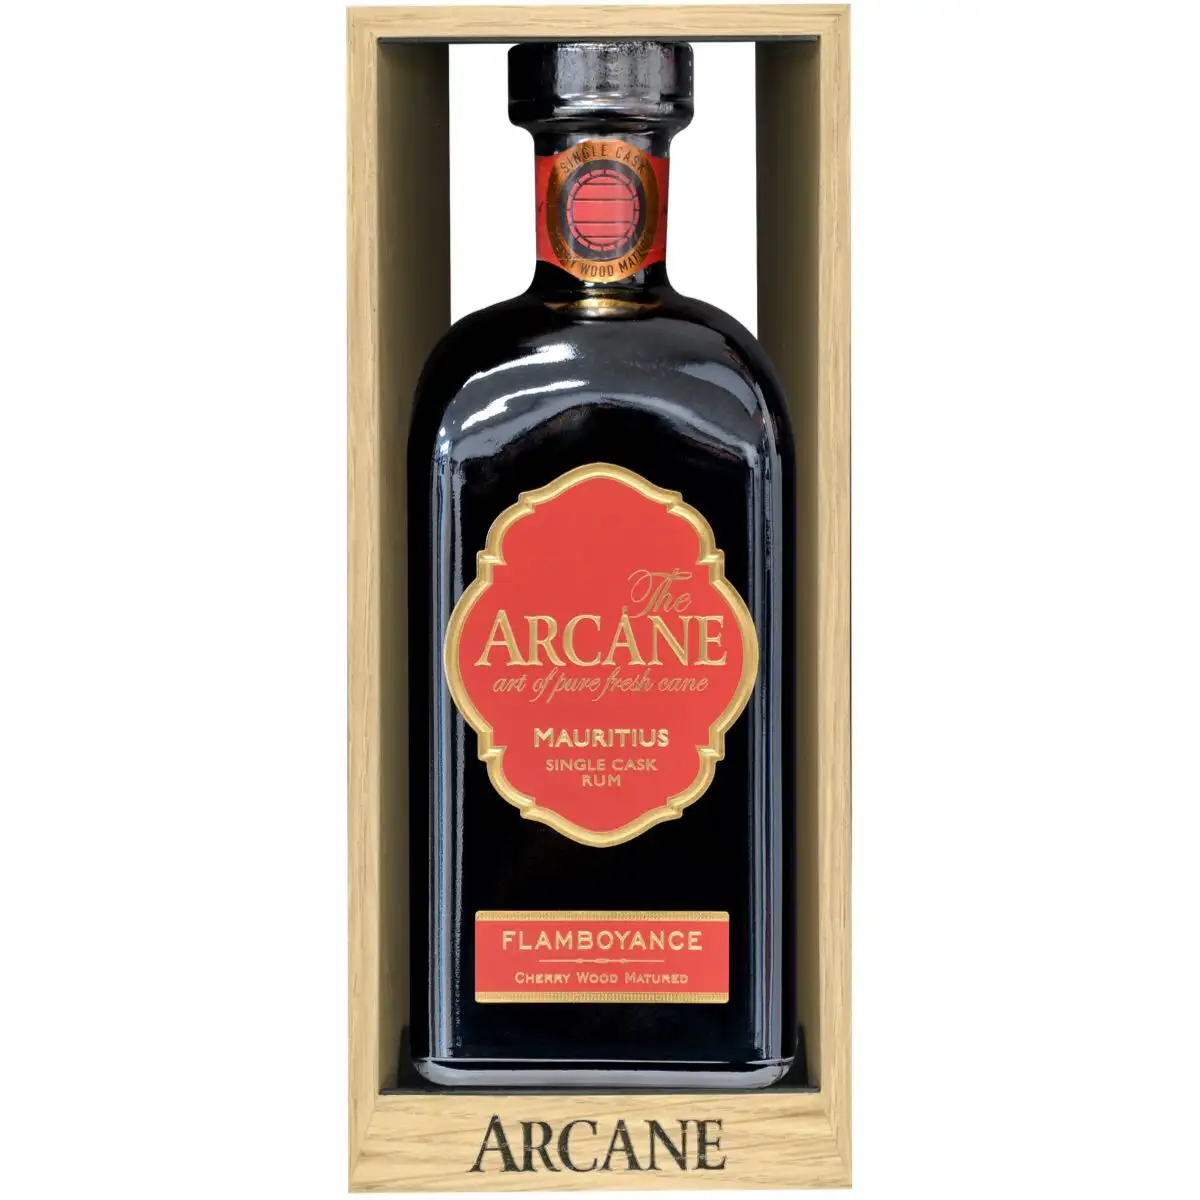 Image of the front of the bottle of the rum Arcane Flamboyance